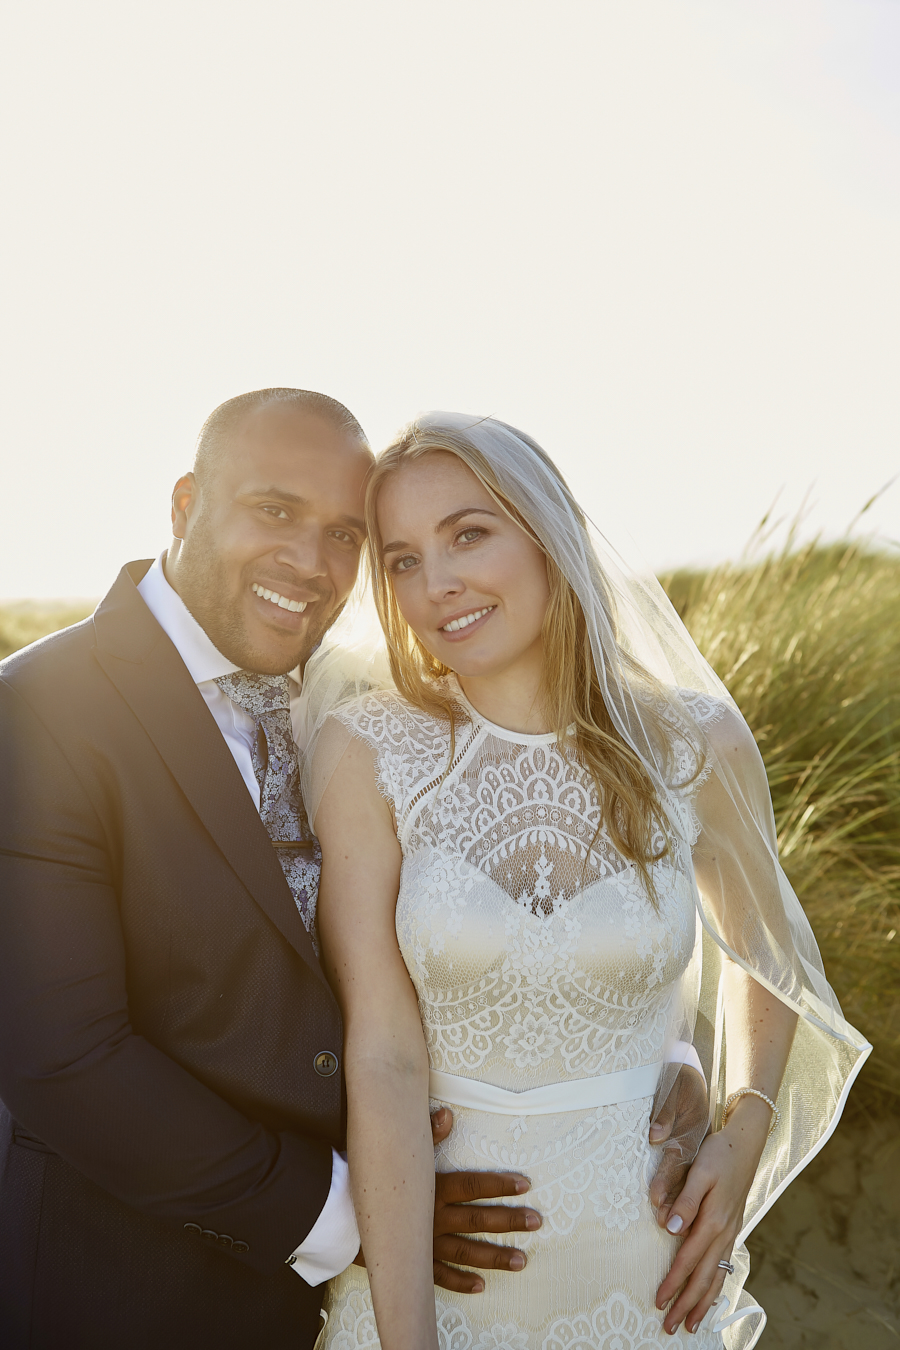 Sarah & Sanusi’s classic and timeless wedding in Rye, with Morris & Mully Wedding Photography